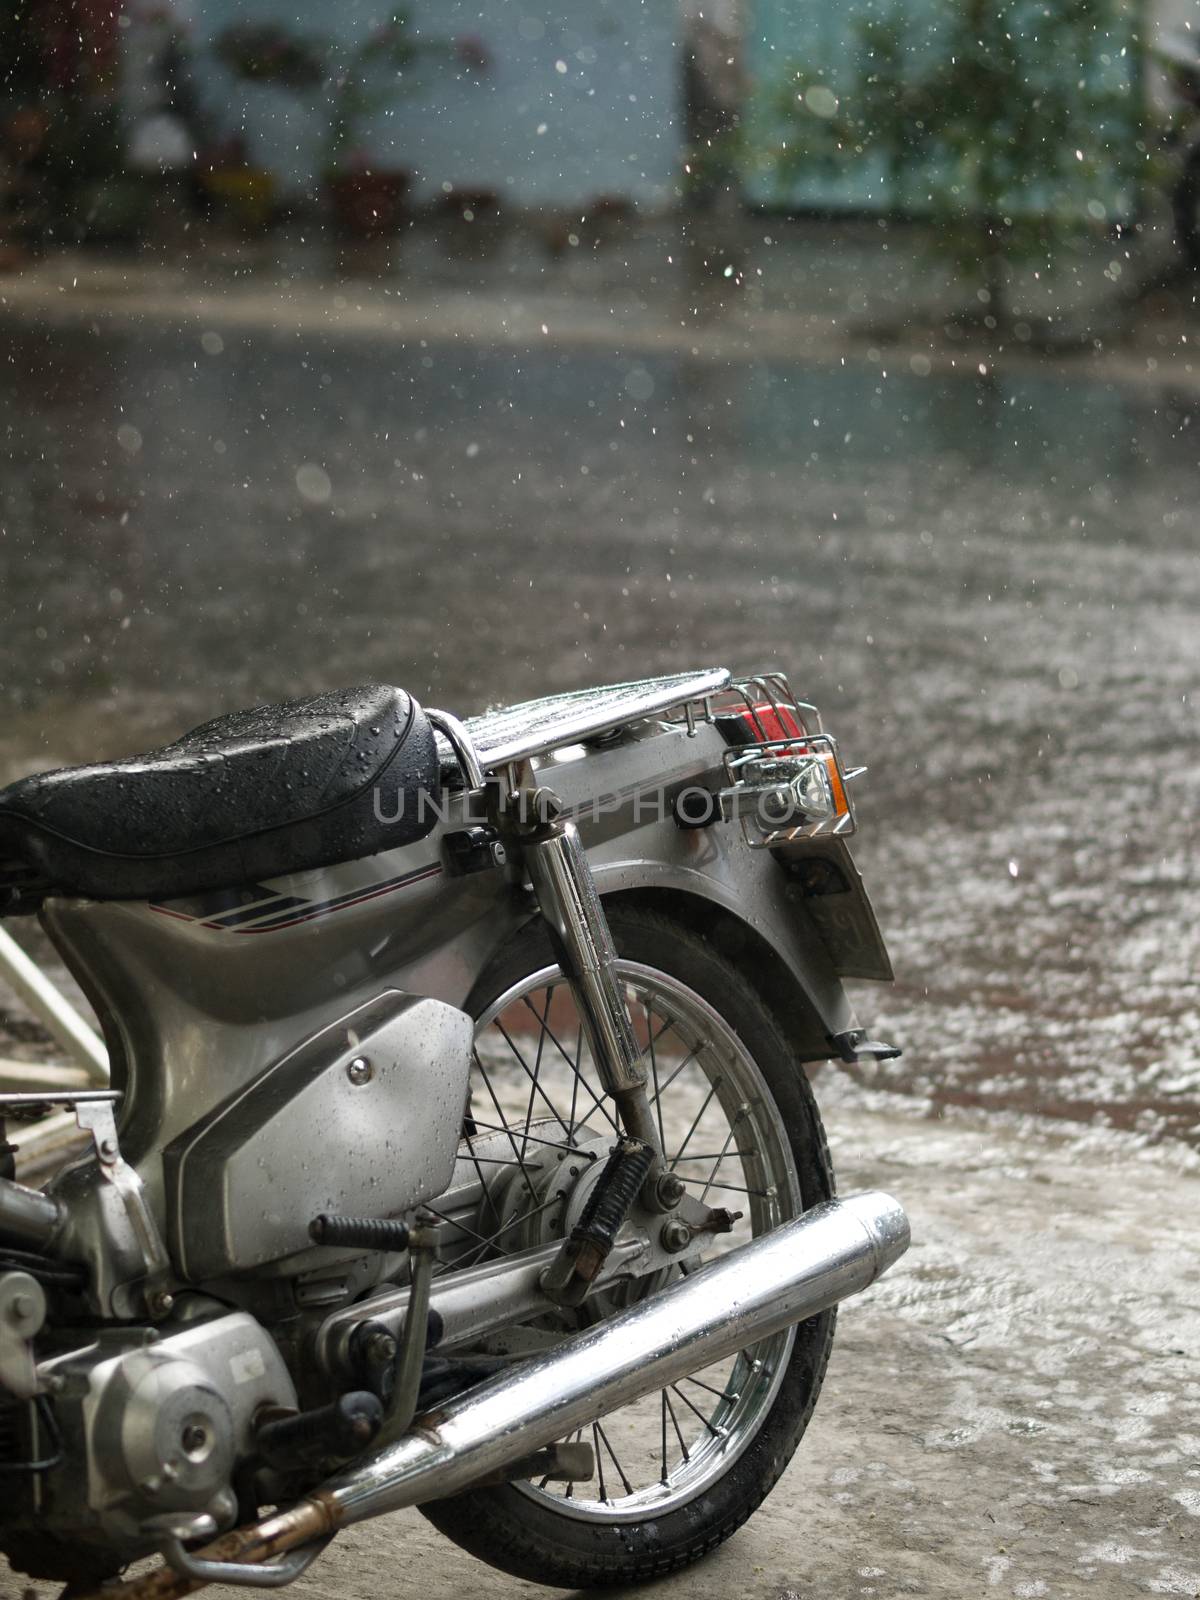 MOTORCYCLE AND CLOSE-UP OF RAINDROPS by PrettyTG